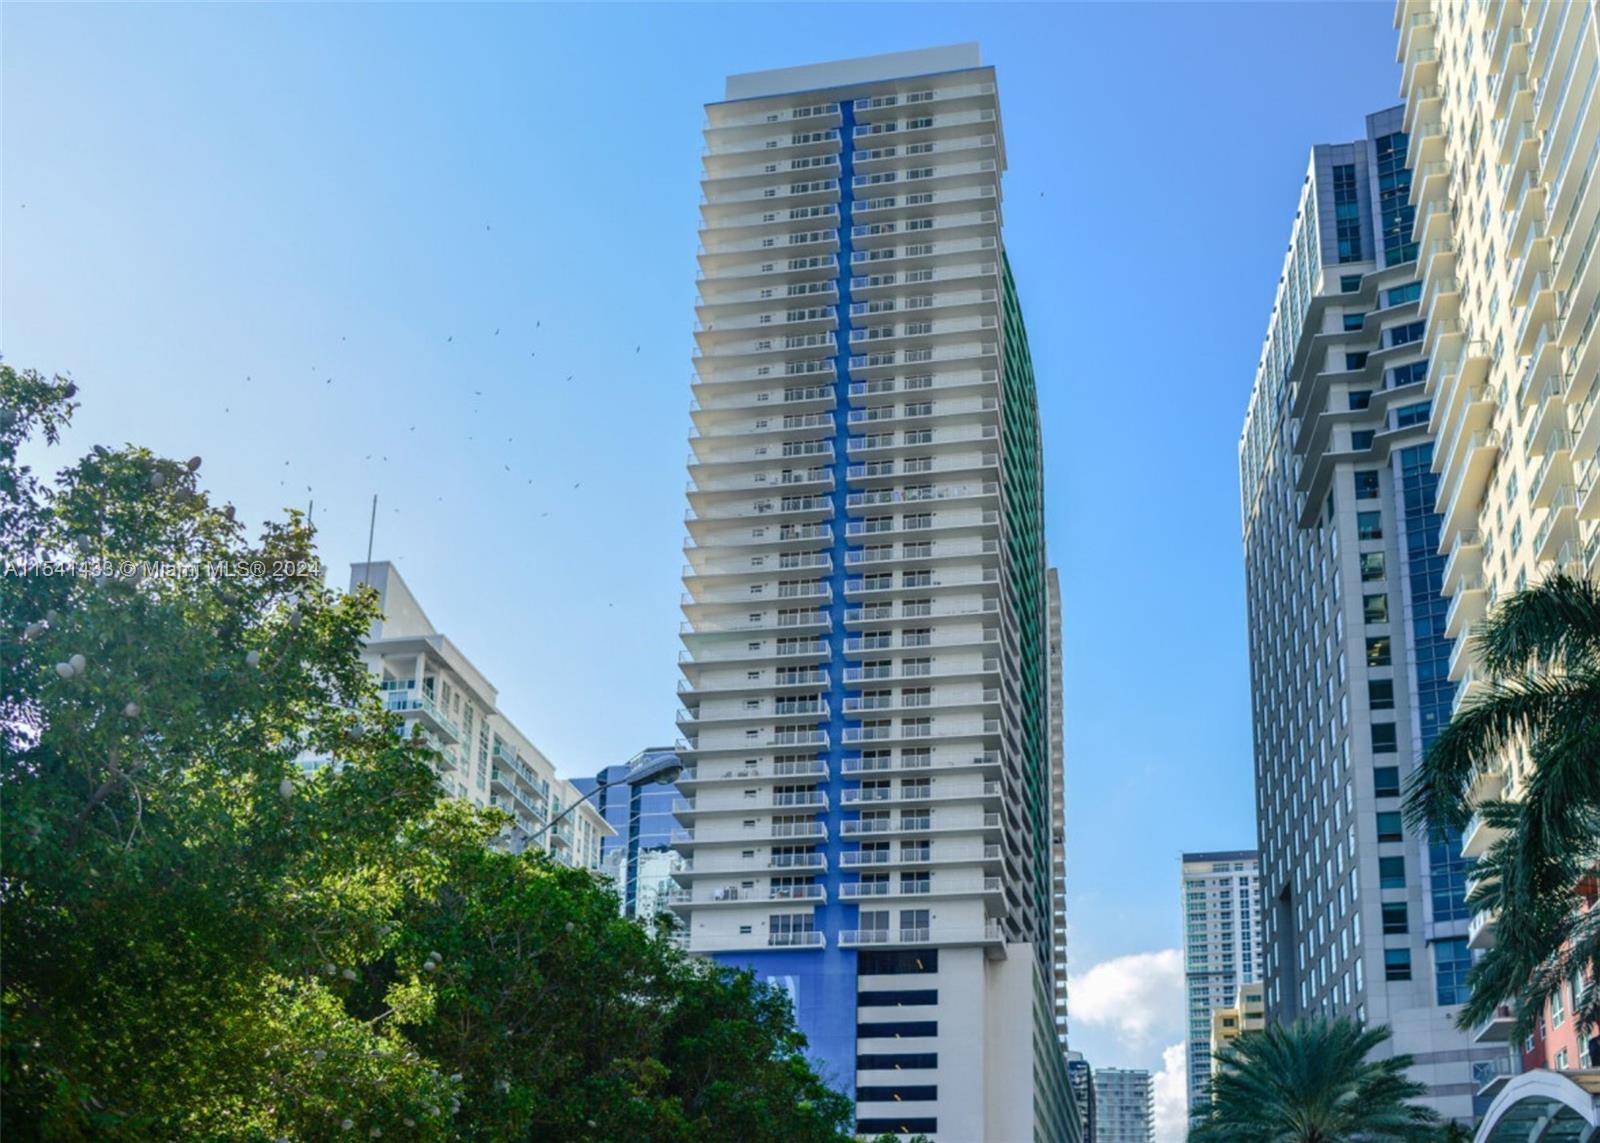 BEAUTIFUL 1BED 1BATH IN THE CLUB AT BRICKELL BAY PLAZA IN BRICKELL.